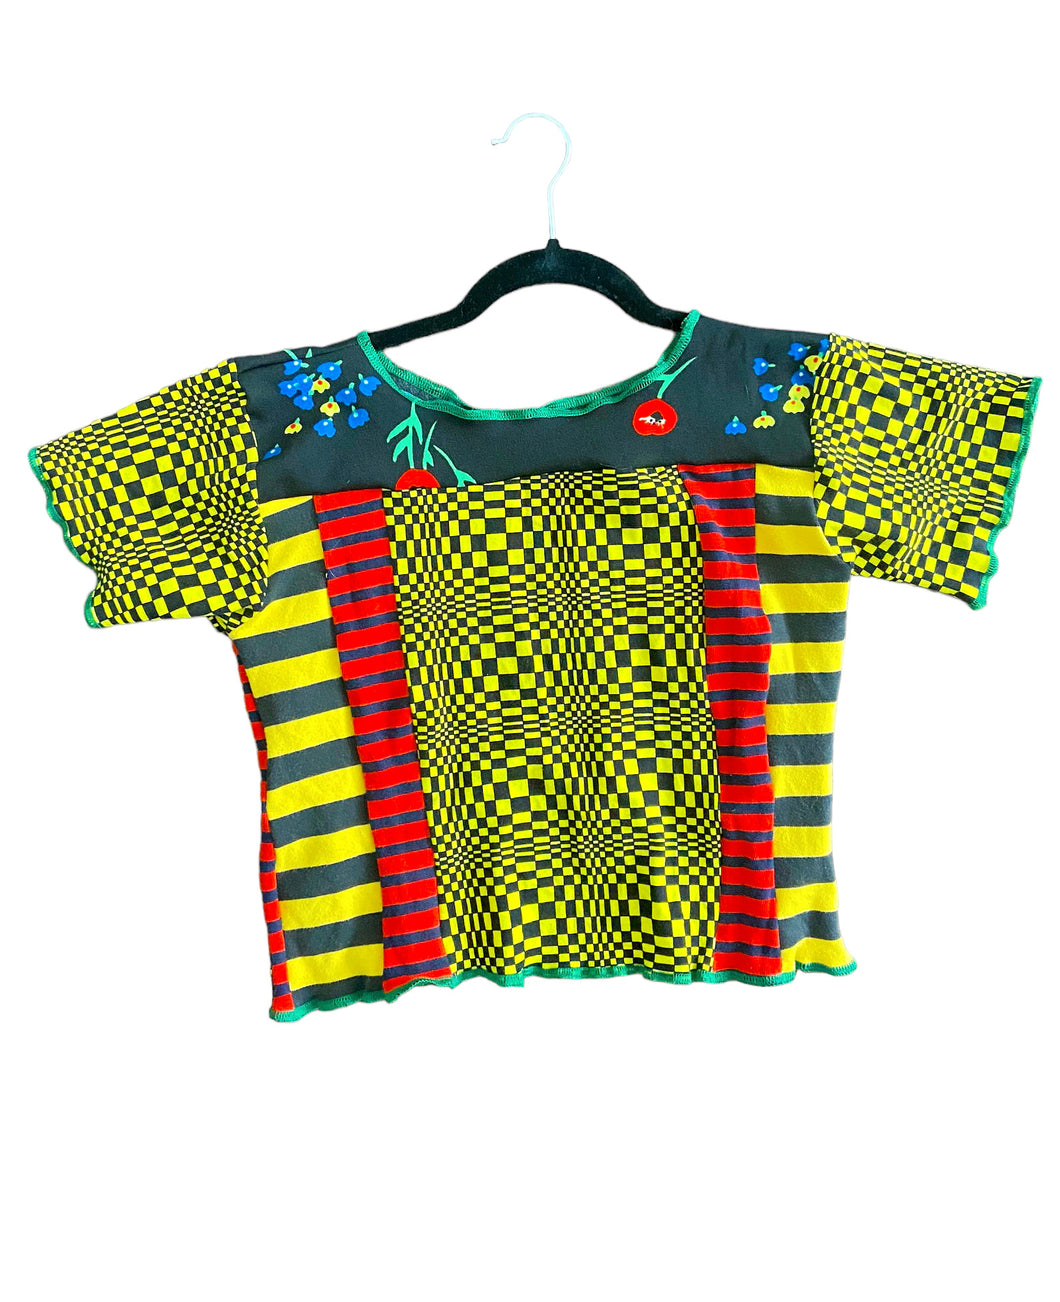 Primary Colors Patchwork Tee S/M